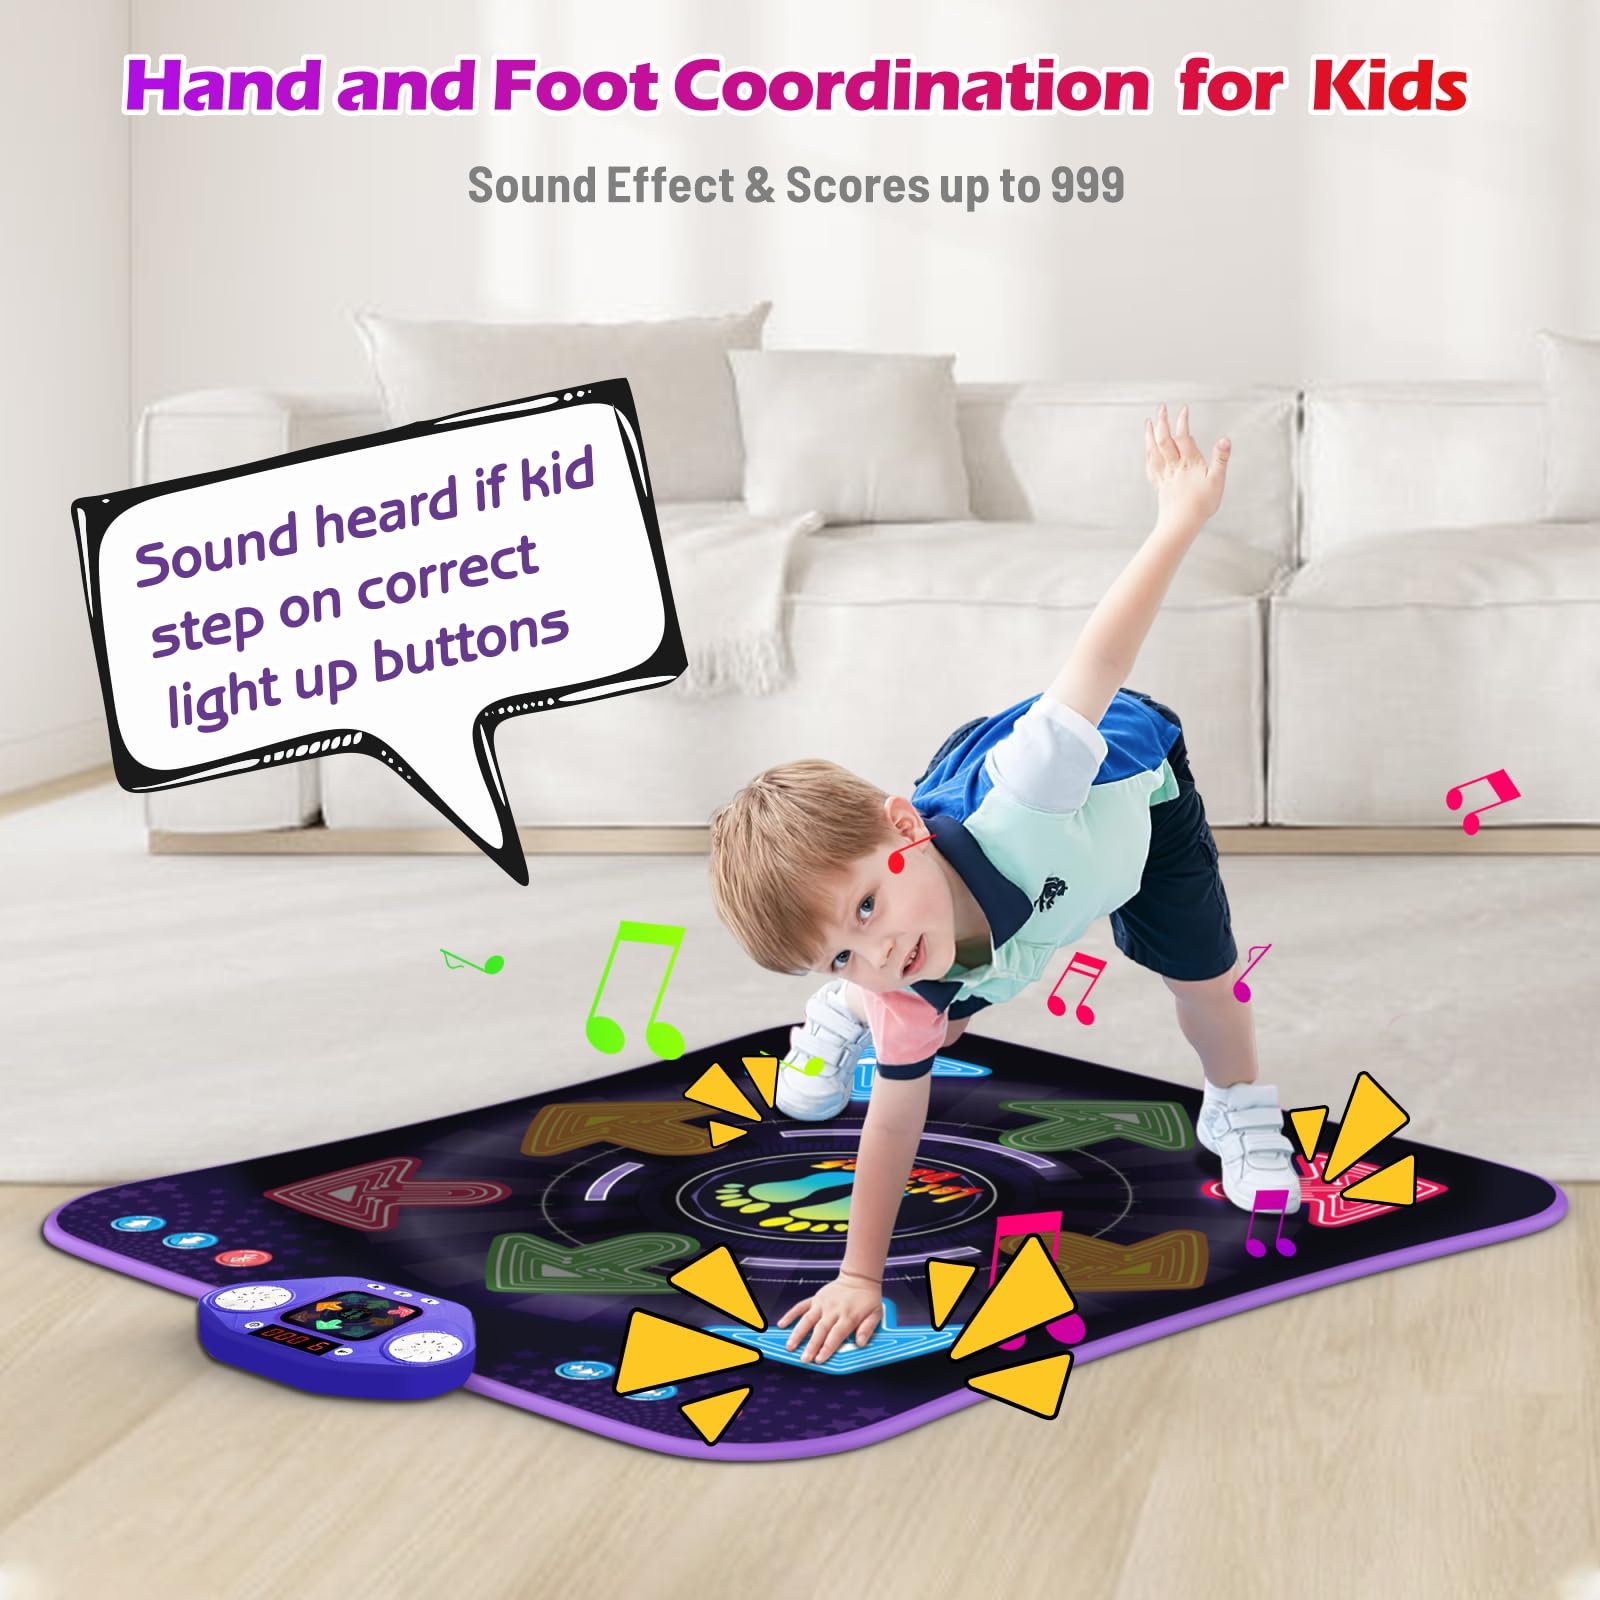 Dance Mat Toys for 4-12 Year Old Kids, Light-up Dancing Challenges Bluetooth Electronic Dance Mat with 6 Game Modes, Birthday/Xmas Gifts for 4-12 Year Old Girls